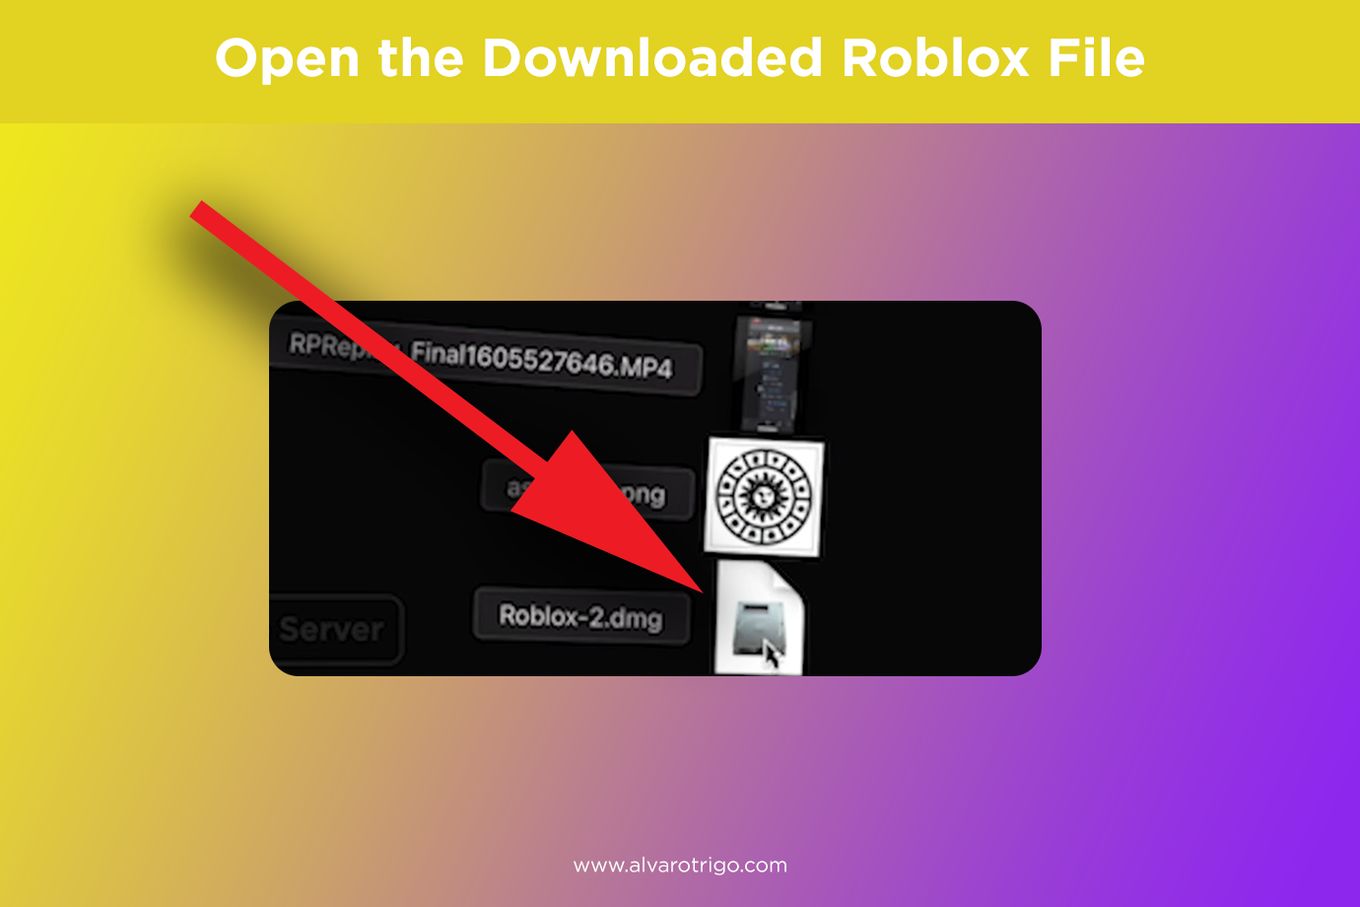 Click 'Roblox File' to open download